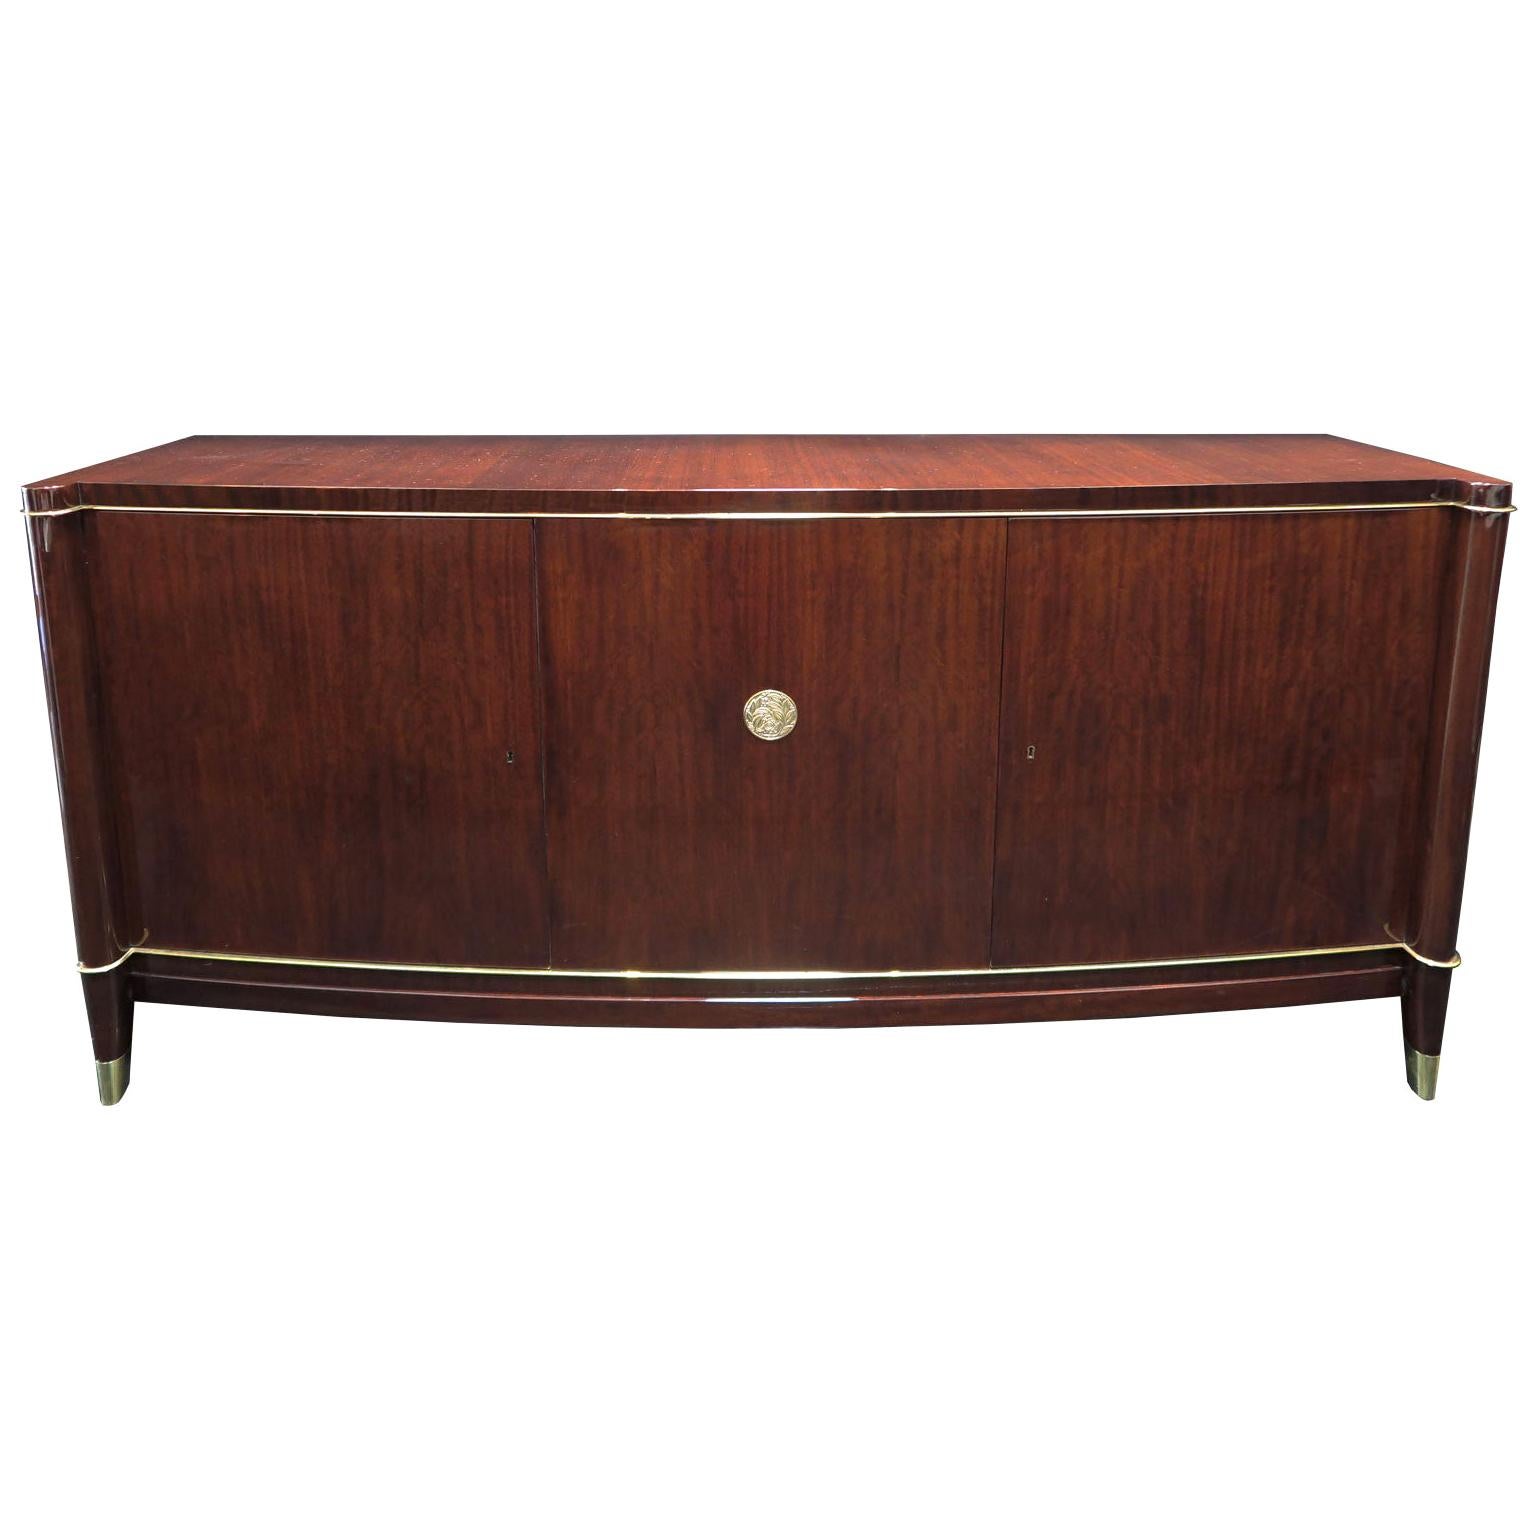 De Coene Frères Sideboard in Rosewood with Brass Medallion, Belgium, circa 1940s